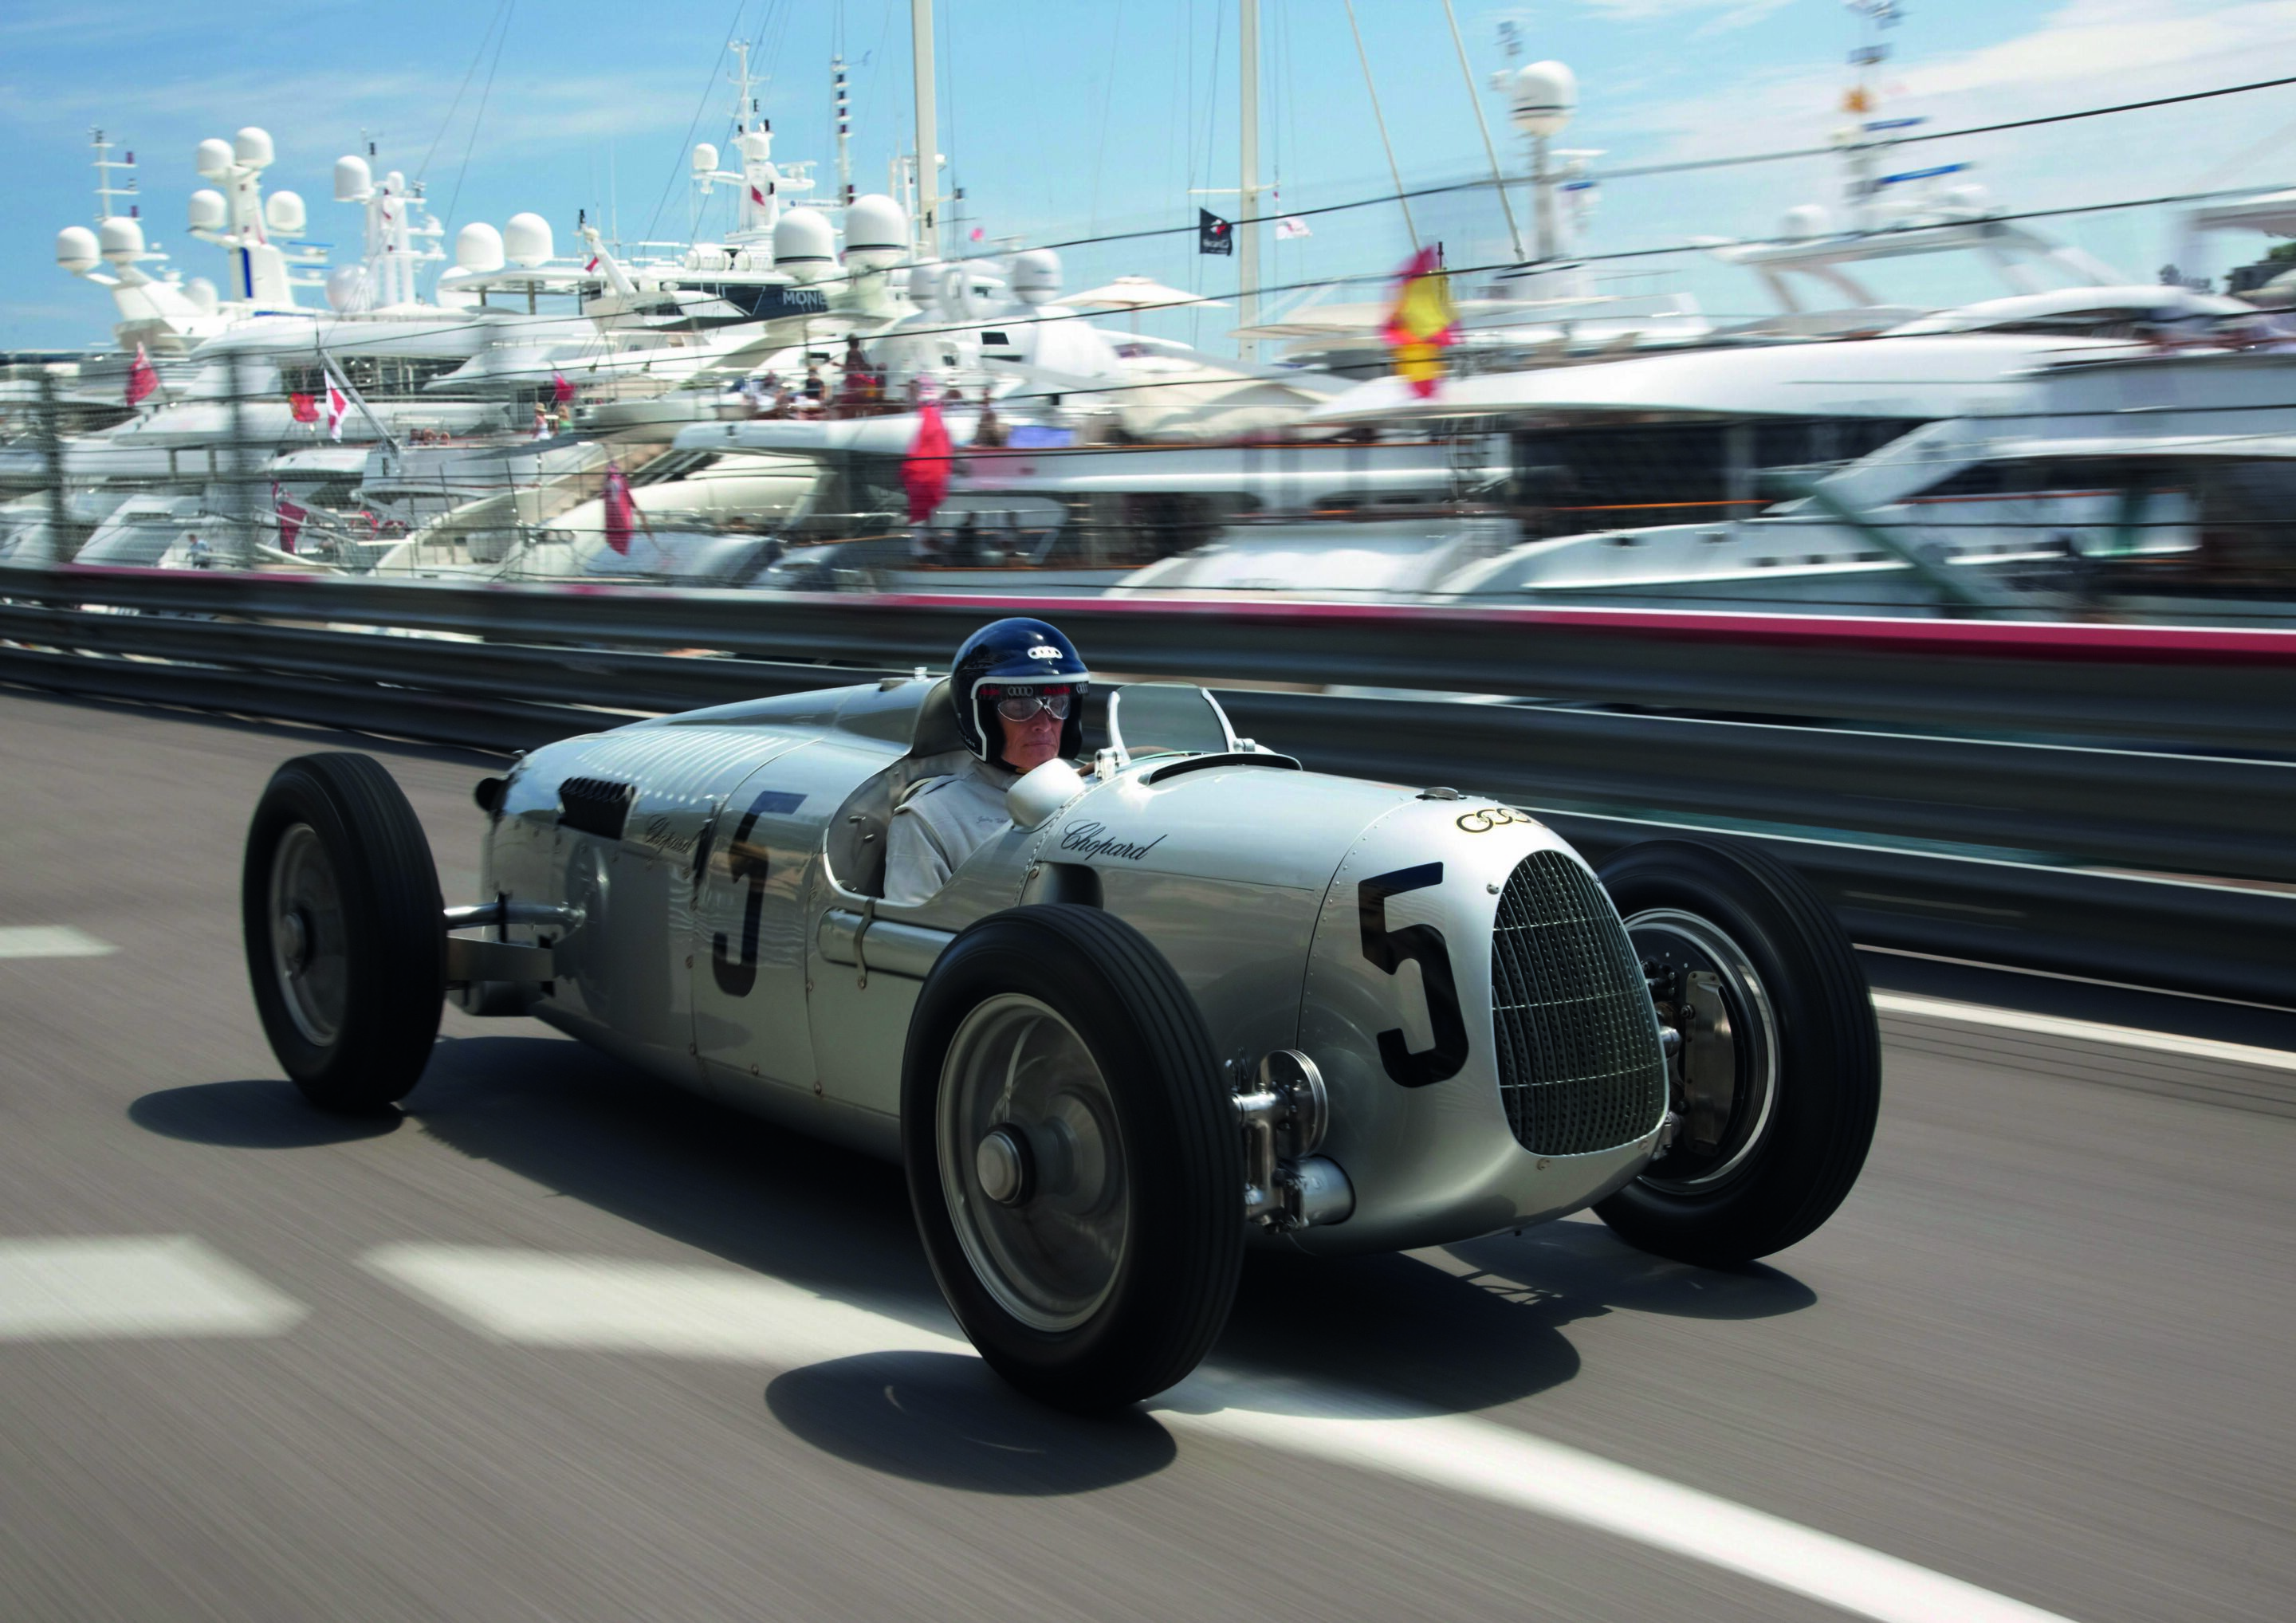 Audi Tradition in Goodwood: revival of the Silver Arrow era